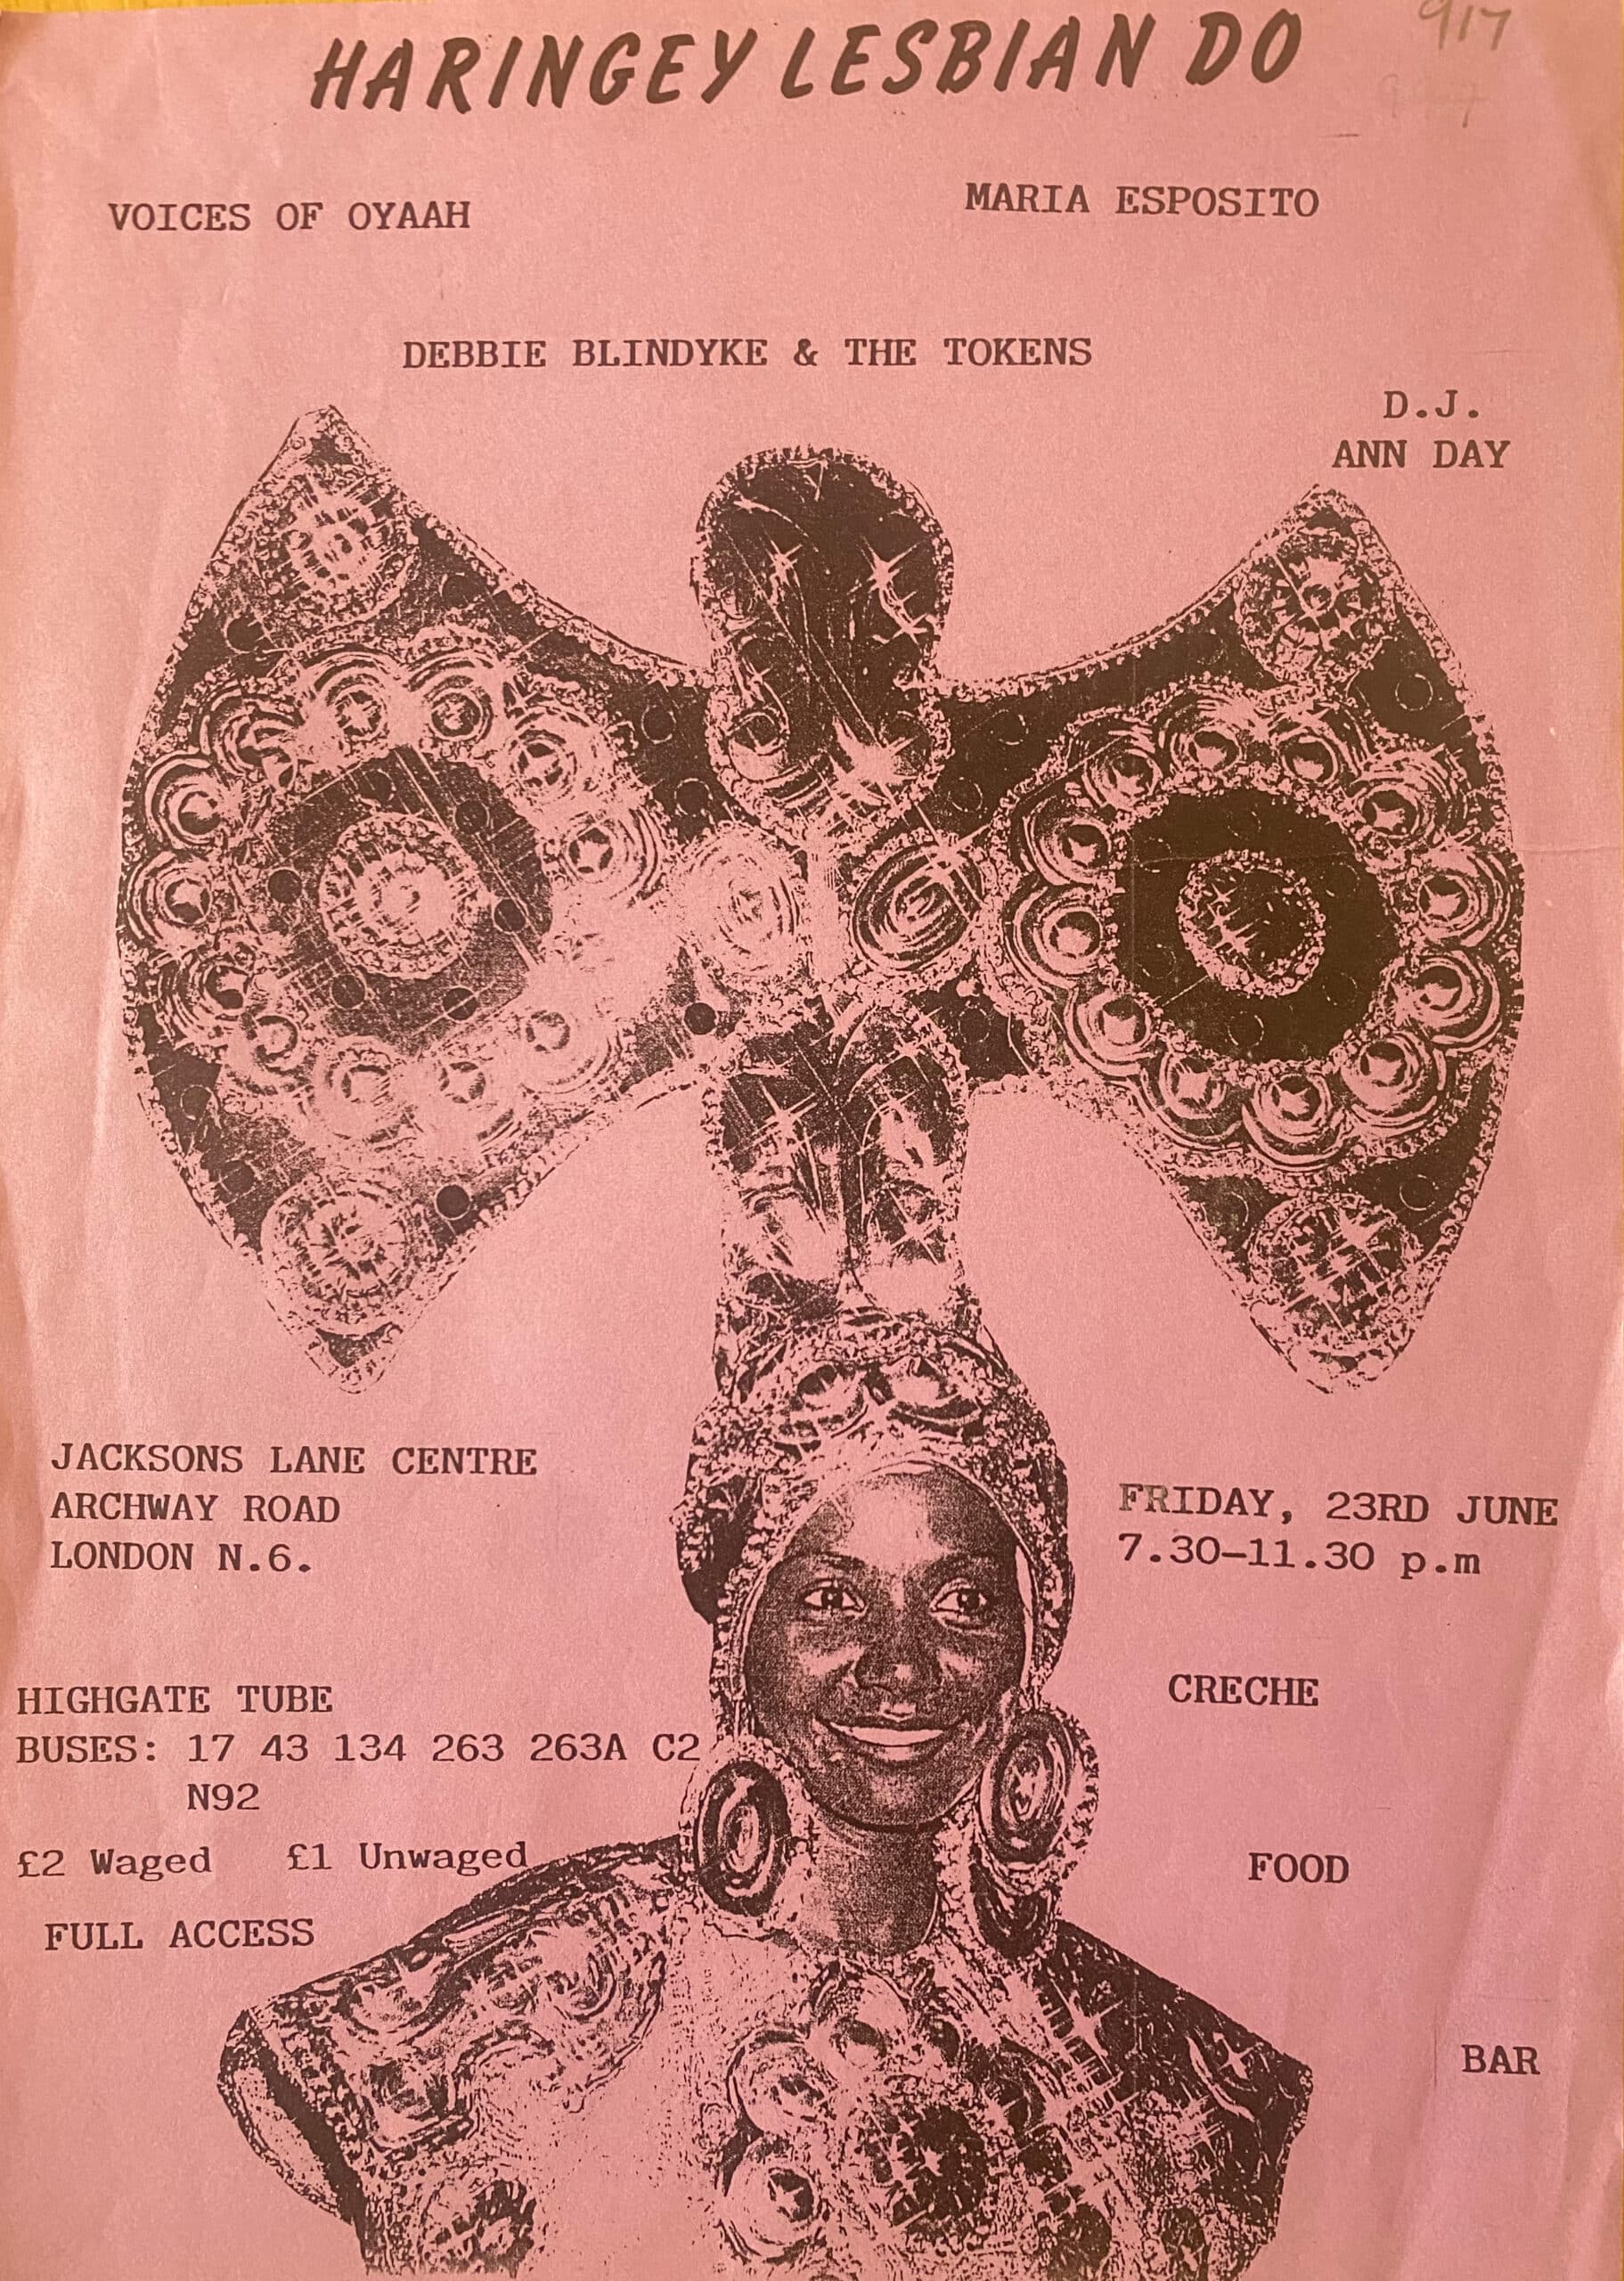 HARINGEY LESBIAN DO A pink piece of paper featuring a black woman in traditional African dress with a headpiece with a figure that looks like an embellished angel. The flyer reads: Voices of Oyaah Maria Esposito Debbie Blindyke & The Tokens D.J. Ann Day Jacksons Lane Centre Archway Road London N6 Highgate Tube Buses: 17 43 134 263 263A C2 N92 £2 Waged £1 Unwaged FULL ACCESS Friday 23rd June 7:30-11:30pm CRECHE FOOD BAR